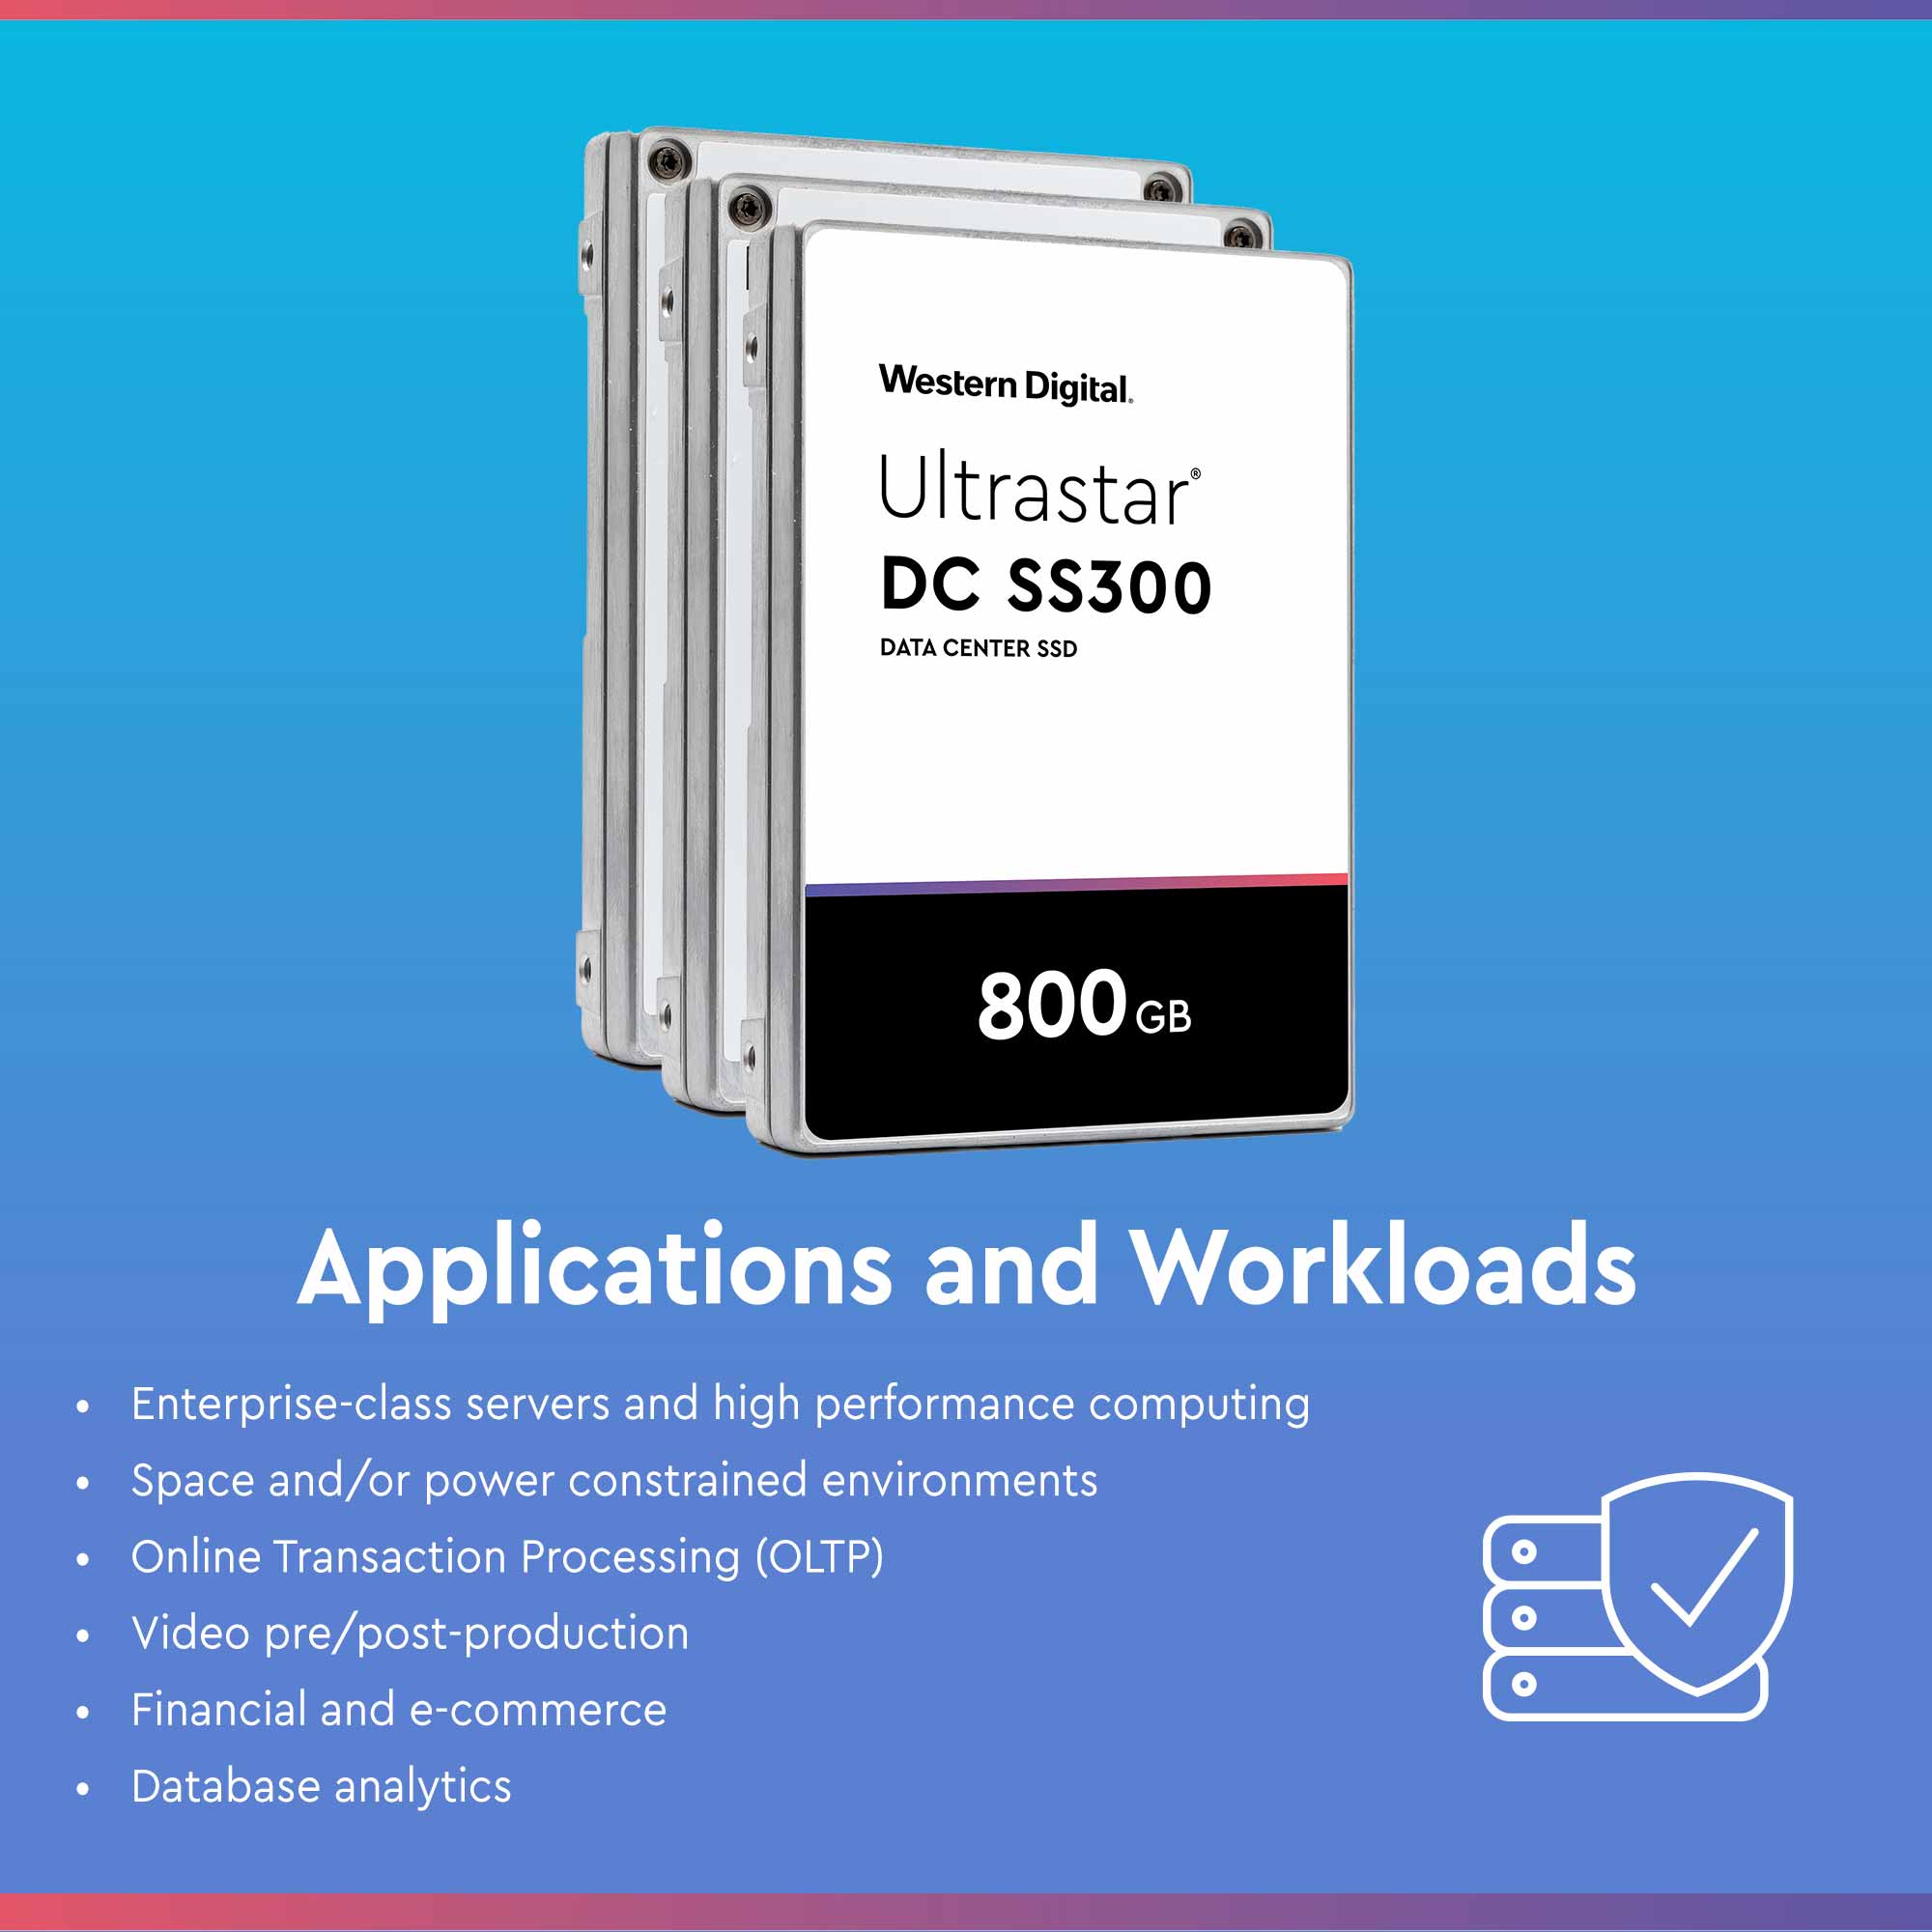 Western Digital DC SS300 HUSMM3280ASS204 800GB SAS 12Gb/s 512e 2.5in Refurbished SSD - Applications and Workloads